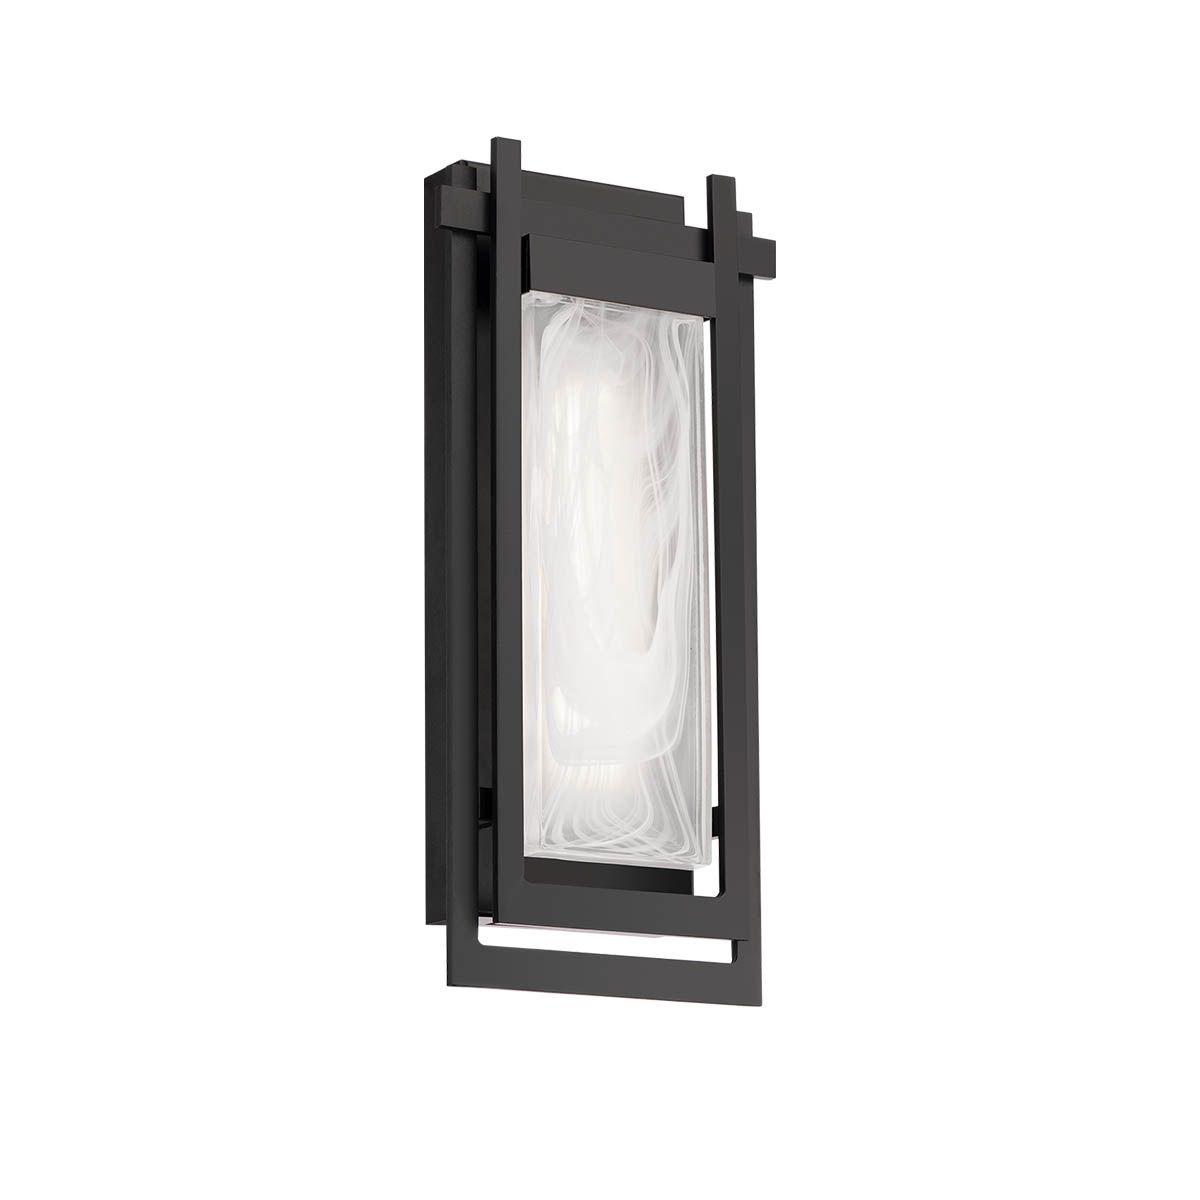 Haze 22 In. LED Outdoor Wall Sconce Black Finish